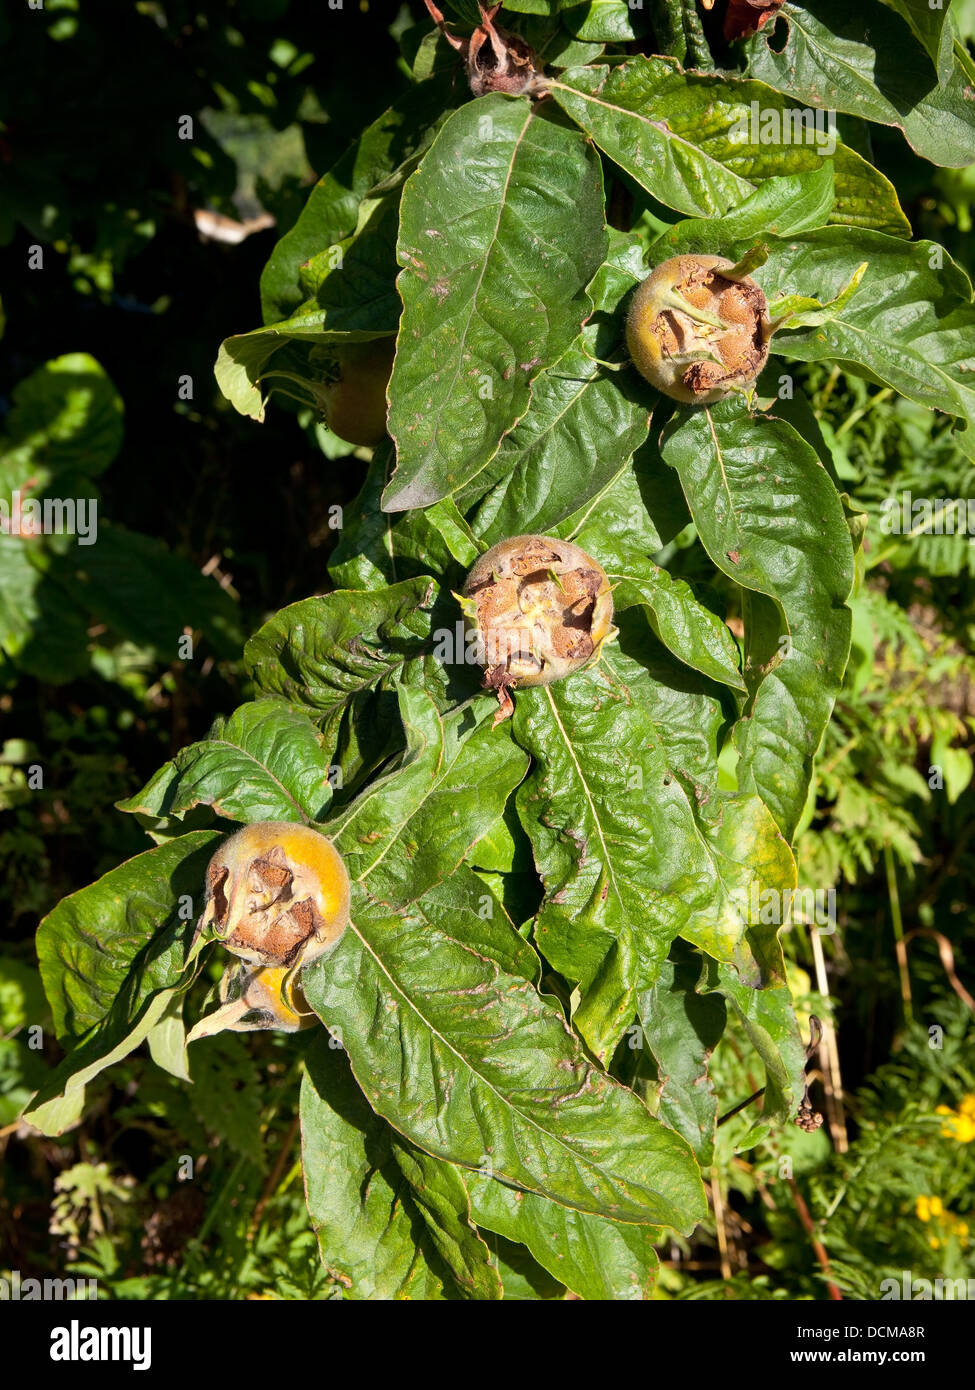 Foliage and fruits of the Medlar tree, Mespilus germanica. Stock Photo